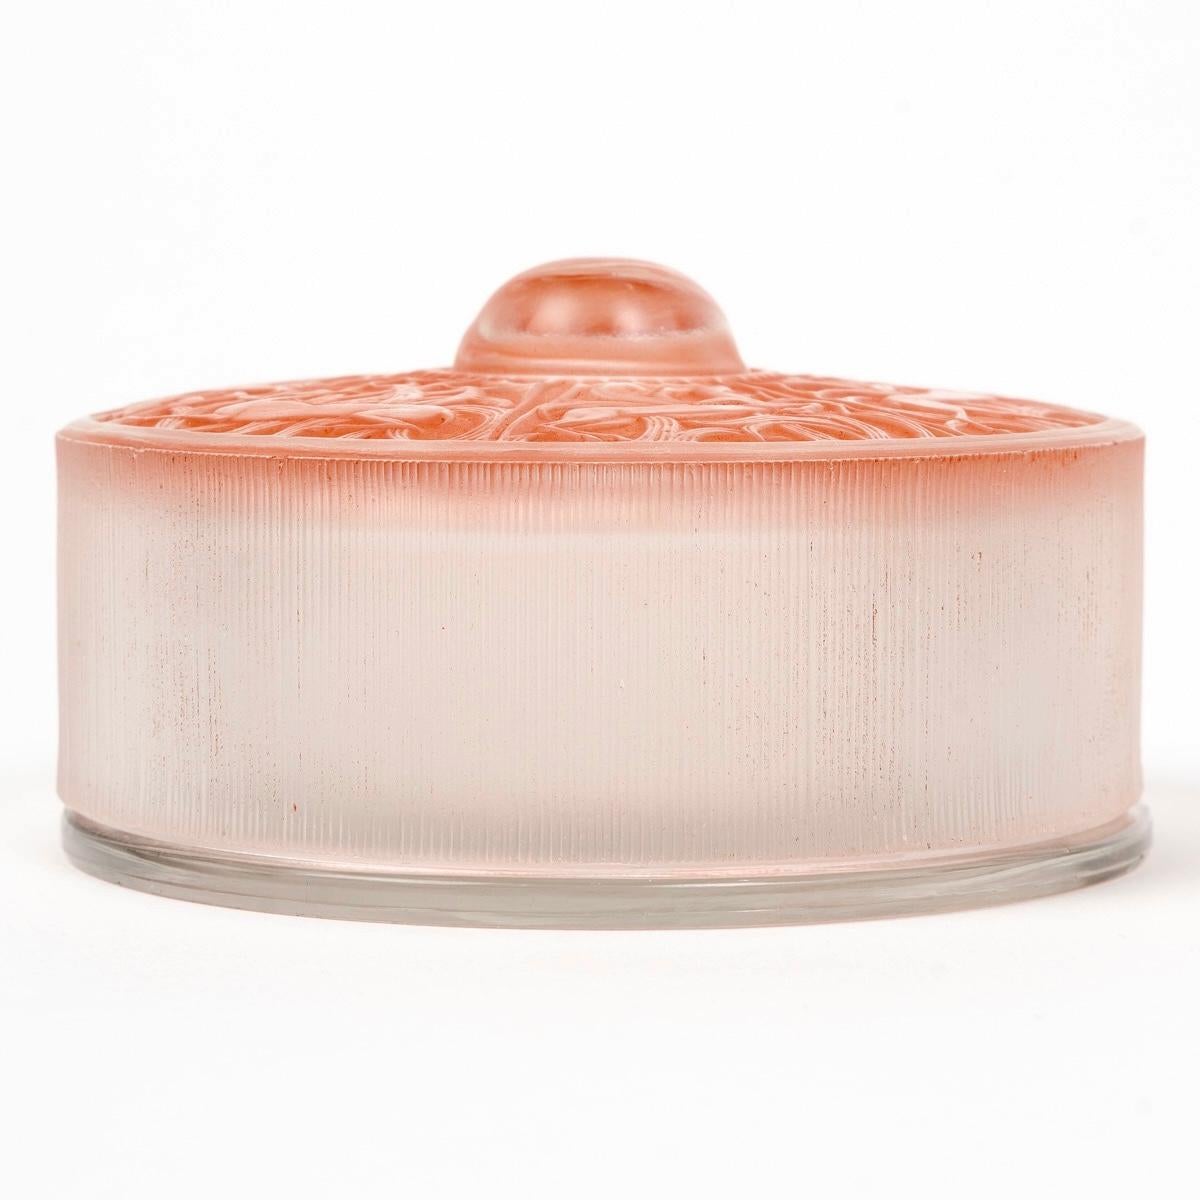 Molded 1924 René Lalique, Box Jar Chantilly Frosted Glass with Pinky Sepia Patina For Sale